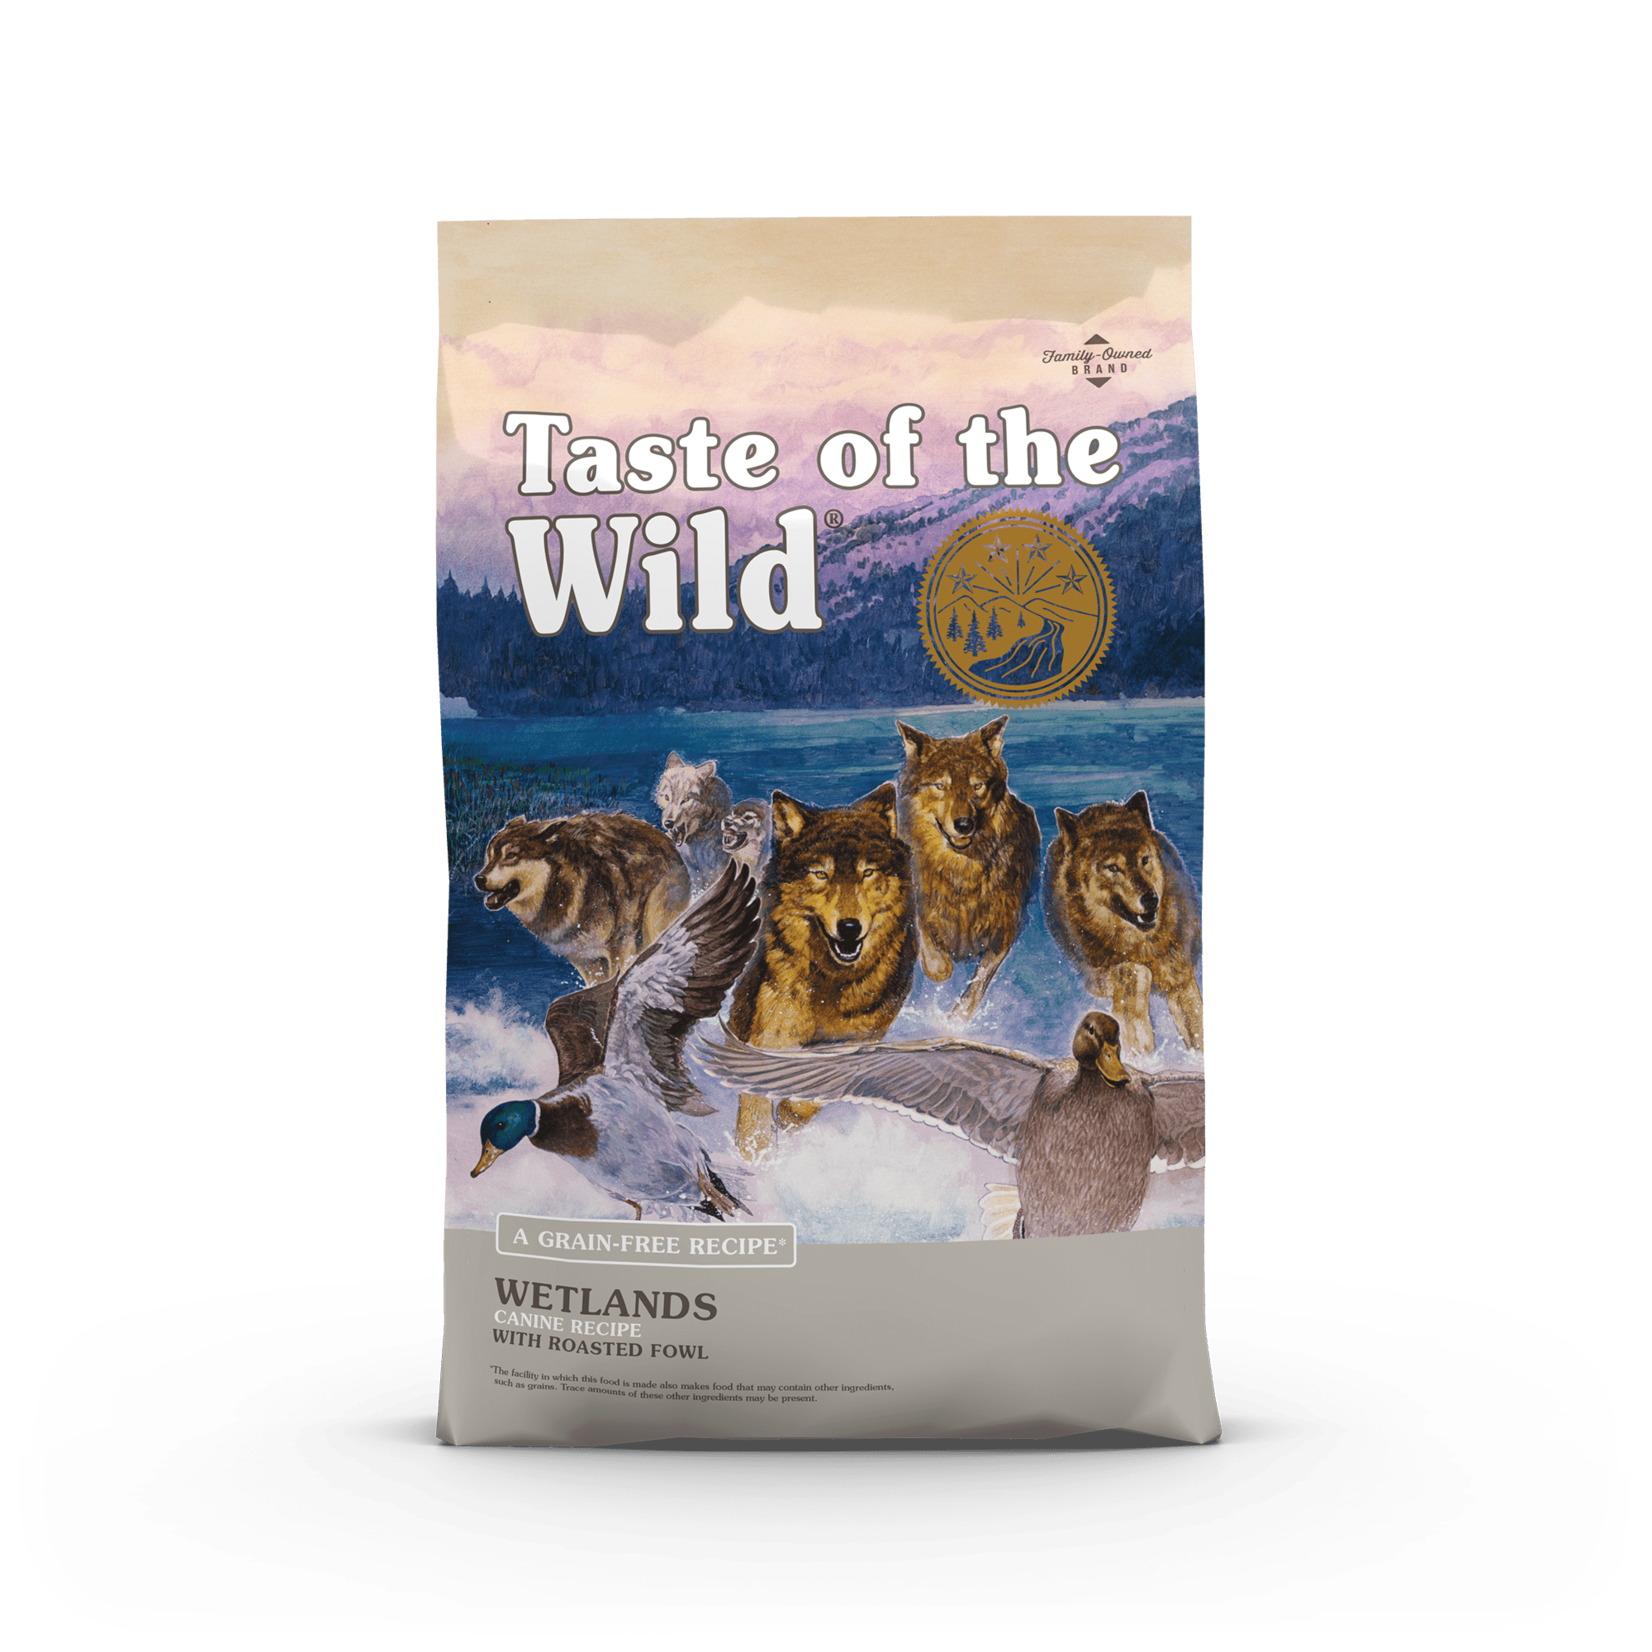 Taste of the Wild Taste of the Wild Dry Dog Food Wetlands Recipe with Roasted Fowl Grain Free